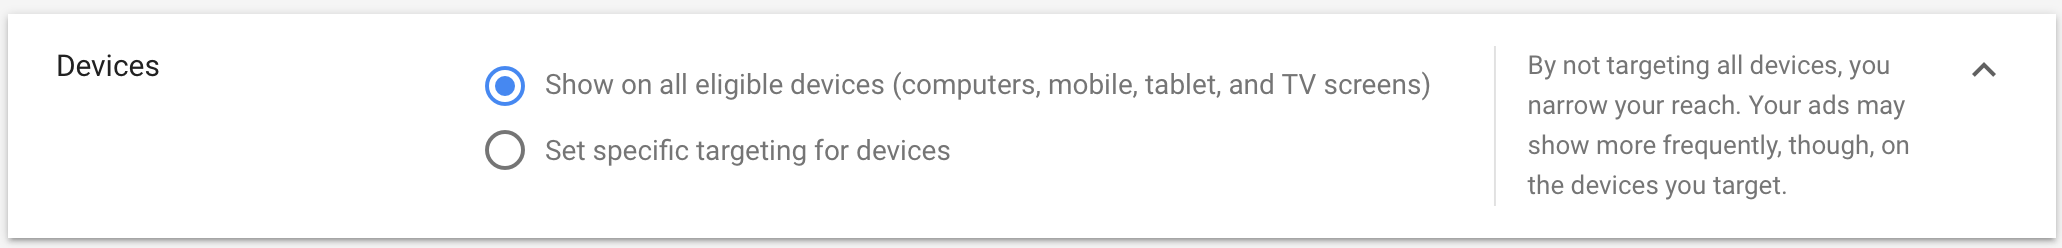 Devices in Google Ads